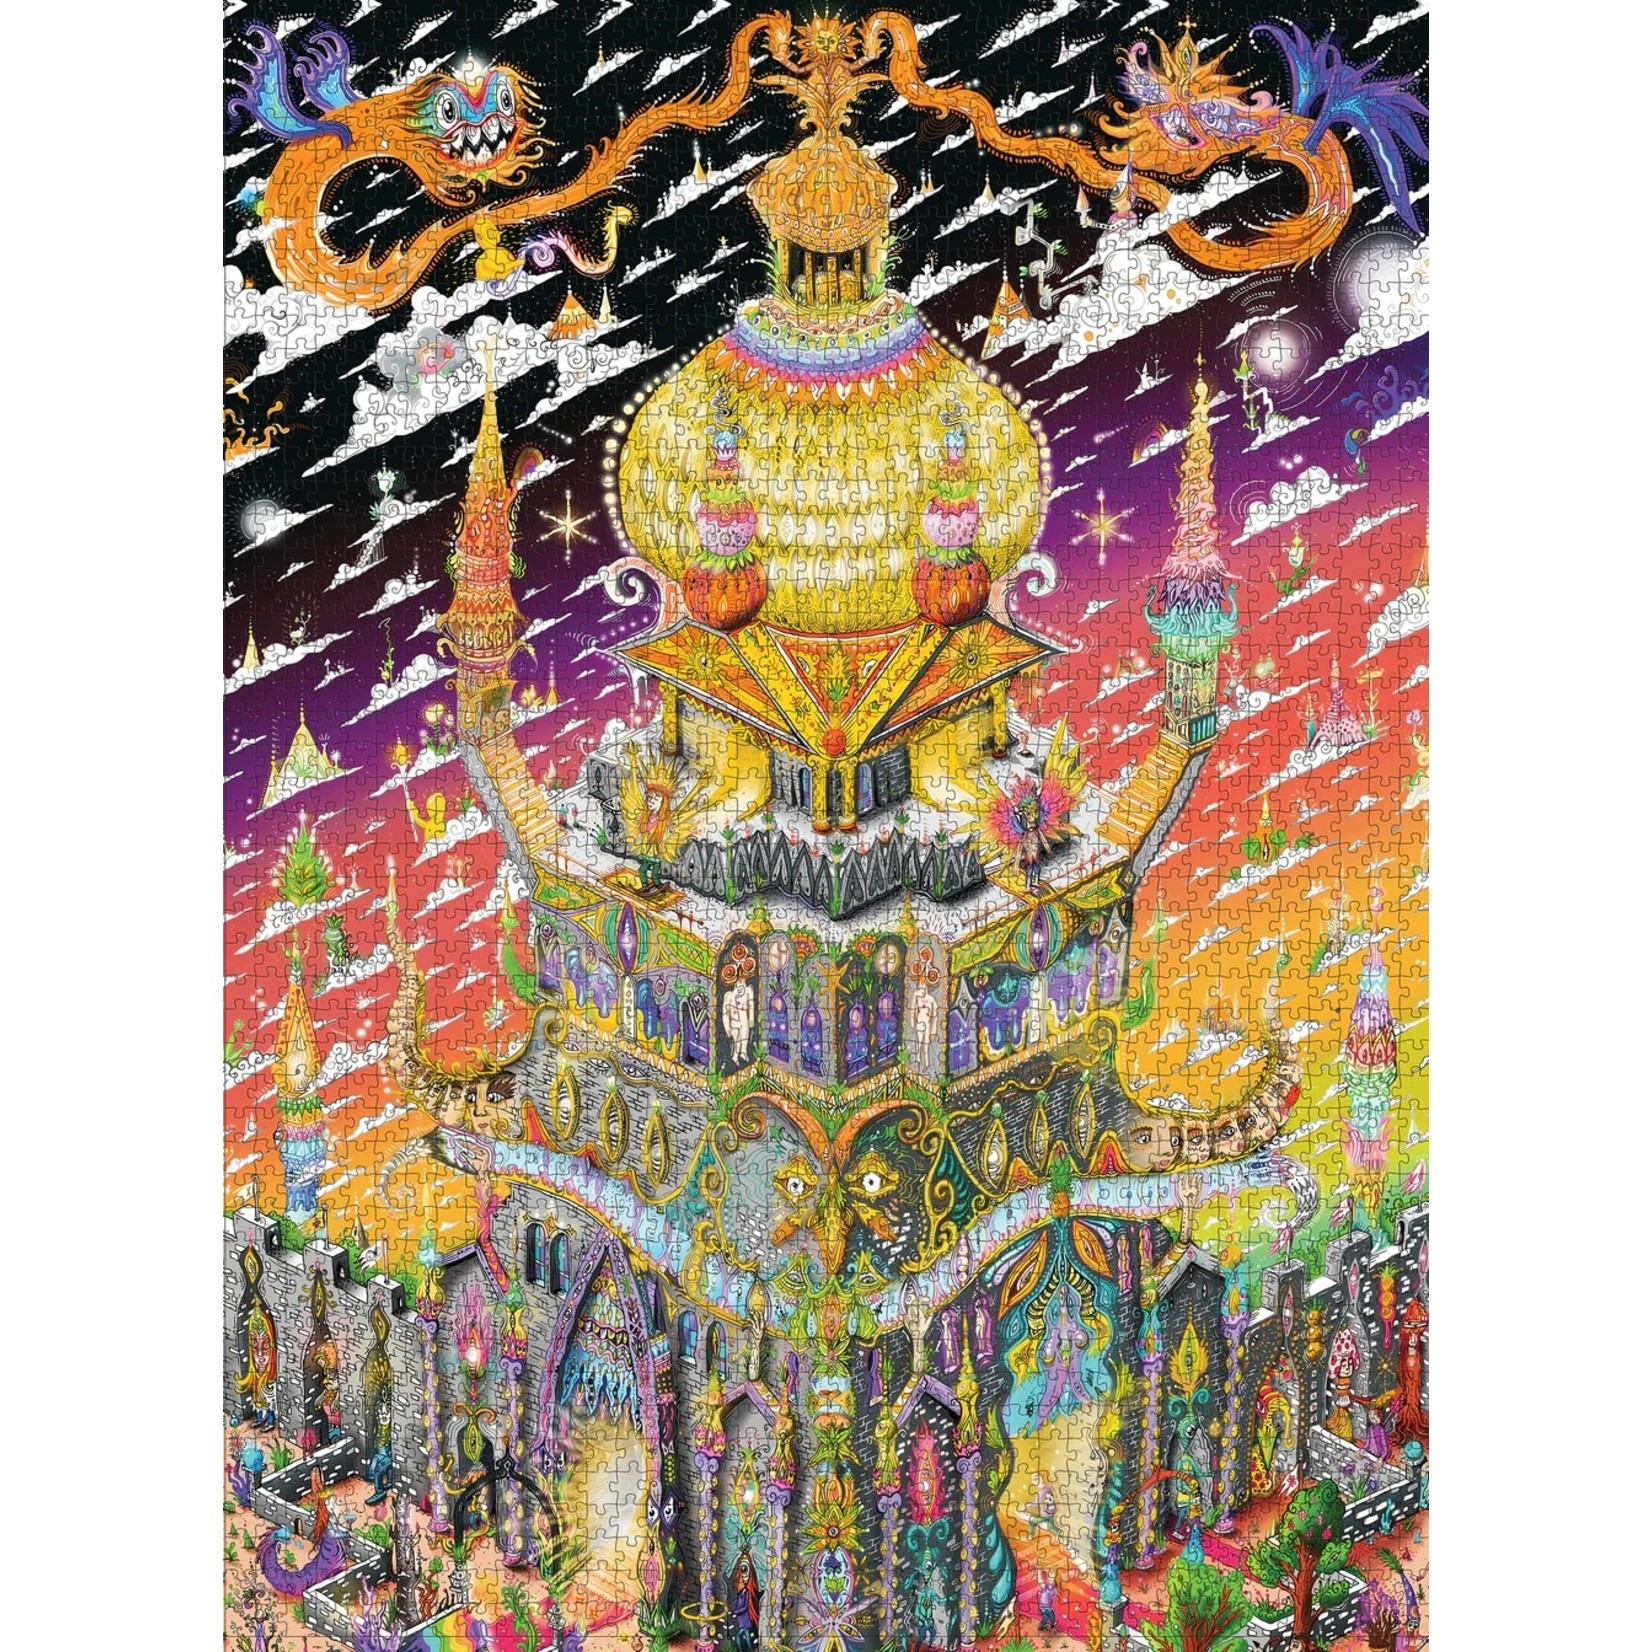 Ruben Topia: The Trippy Tower of Babel 2000pc